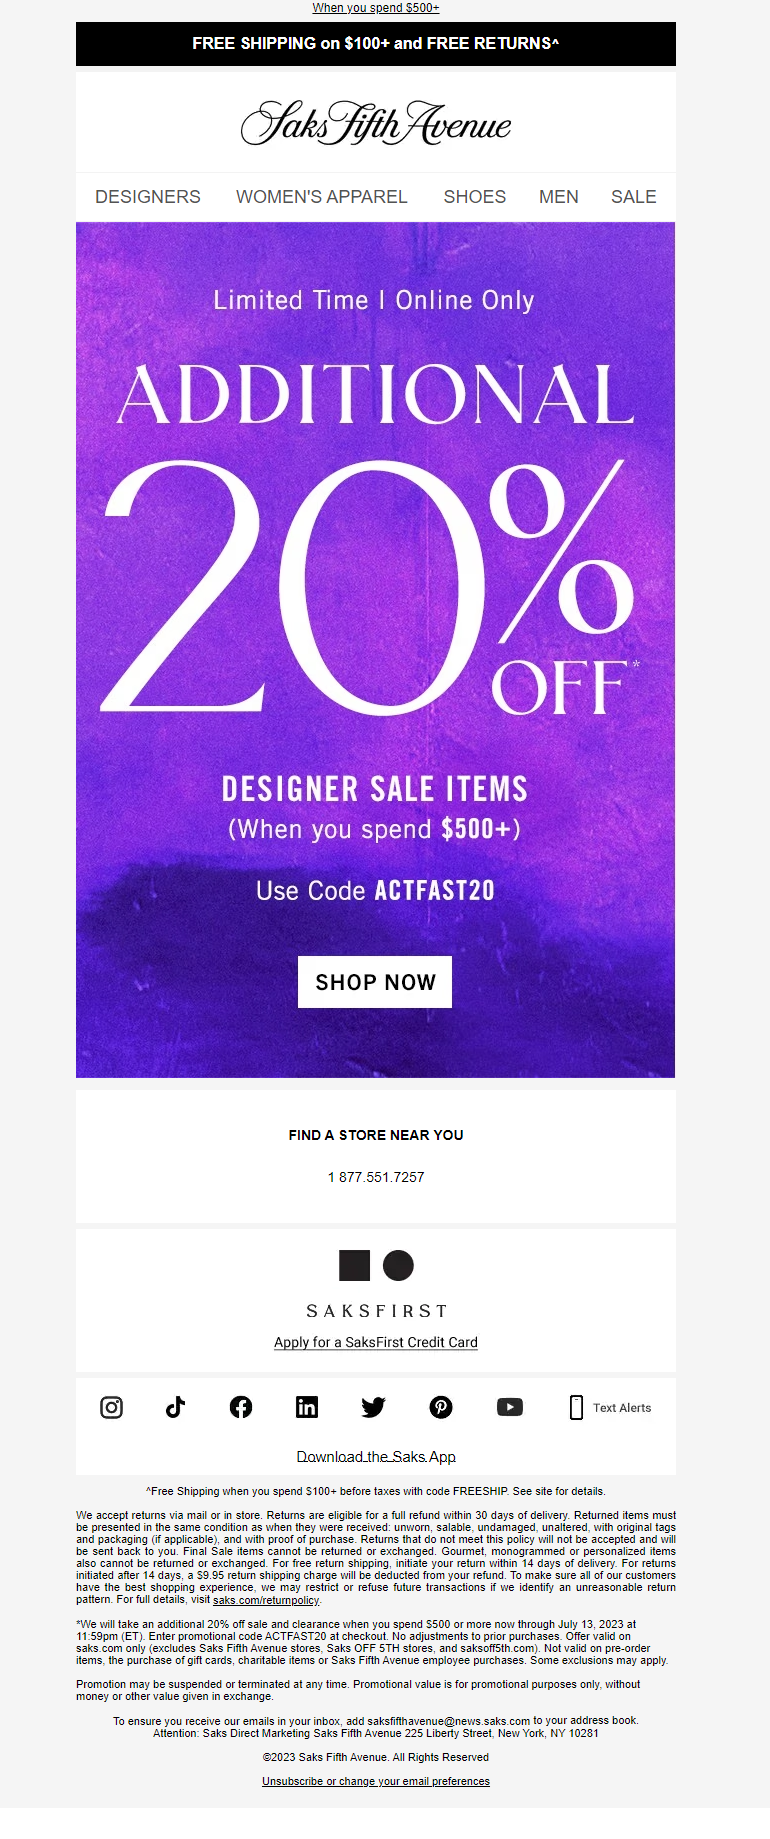 email from Saks Fifth Avenue